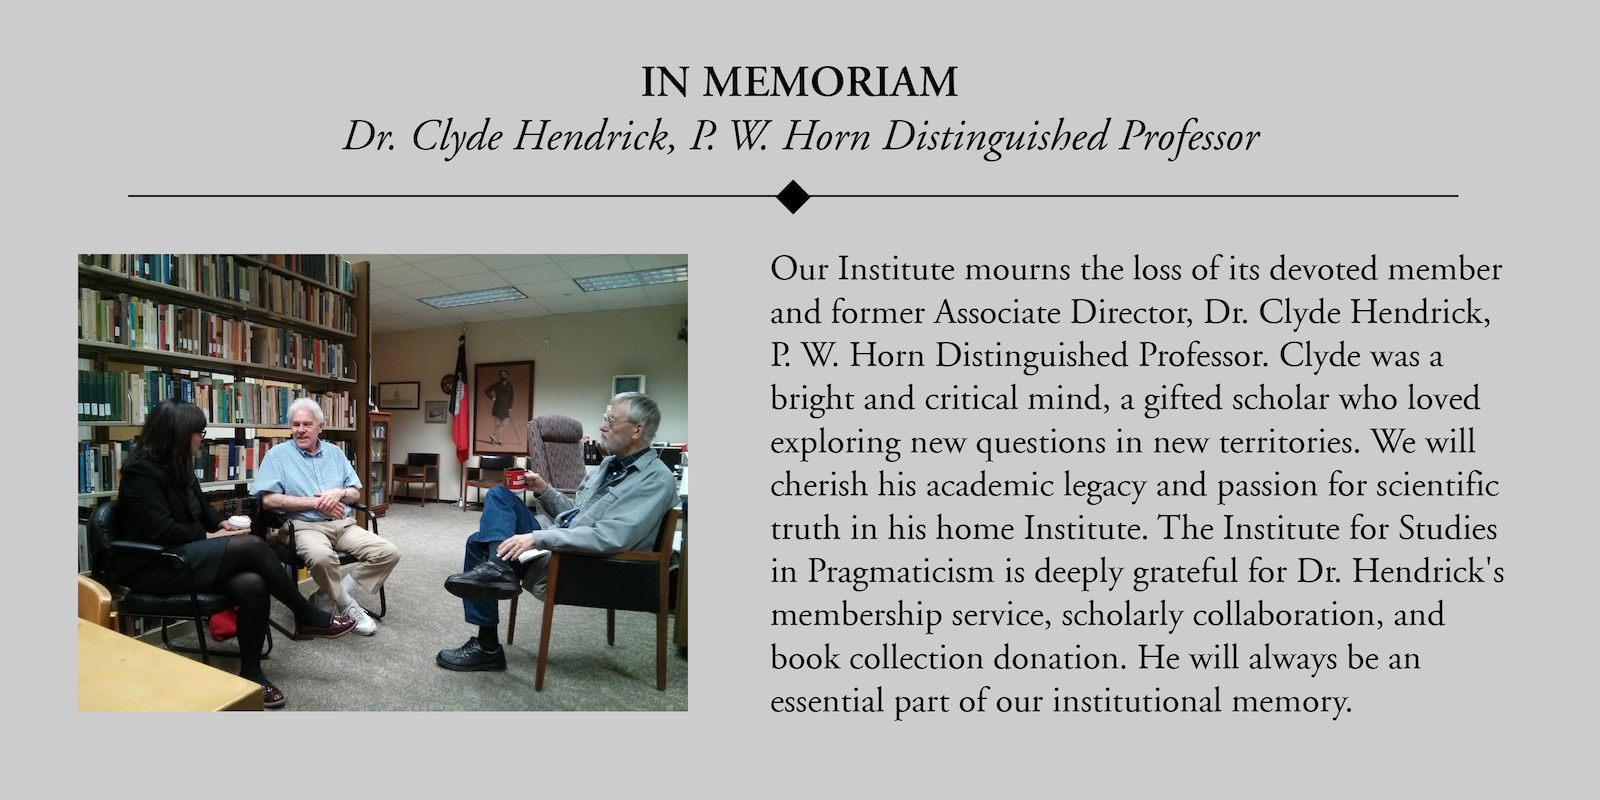 Our Institute mourns the loss of its devoted member and former Associate Director, Dr. Clyde Hendrick, P. W. Horn Distinguished Professor. Clyde was a bright and critical mind, a gifted scholar who loved exploring new questions in new territories. We will cherish his academic legacy and passion for scientific truth in his home Institute. The Institute for Studies in Pragmaticism is deeply grateful for Dr. Hendrick's membership service, scholarly collaboration, and book collection donation. He will always be an essential part of our institutional memory.